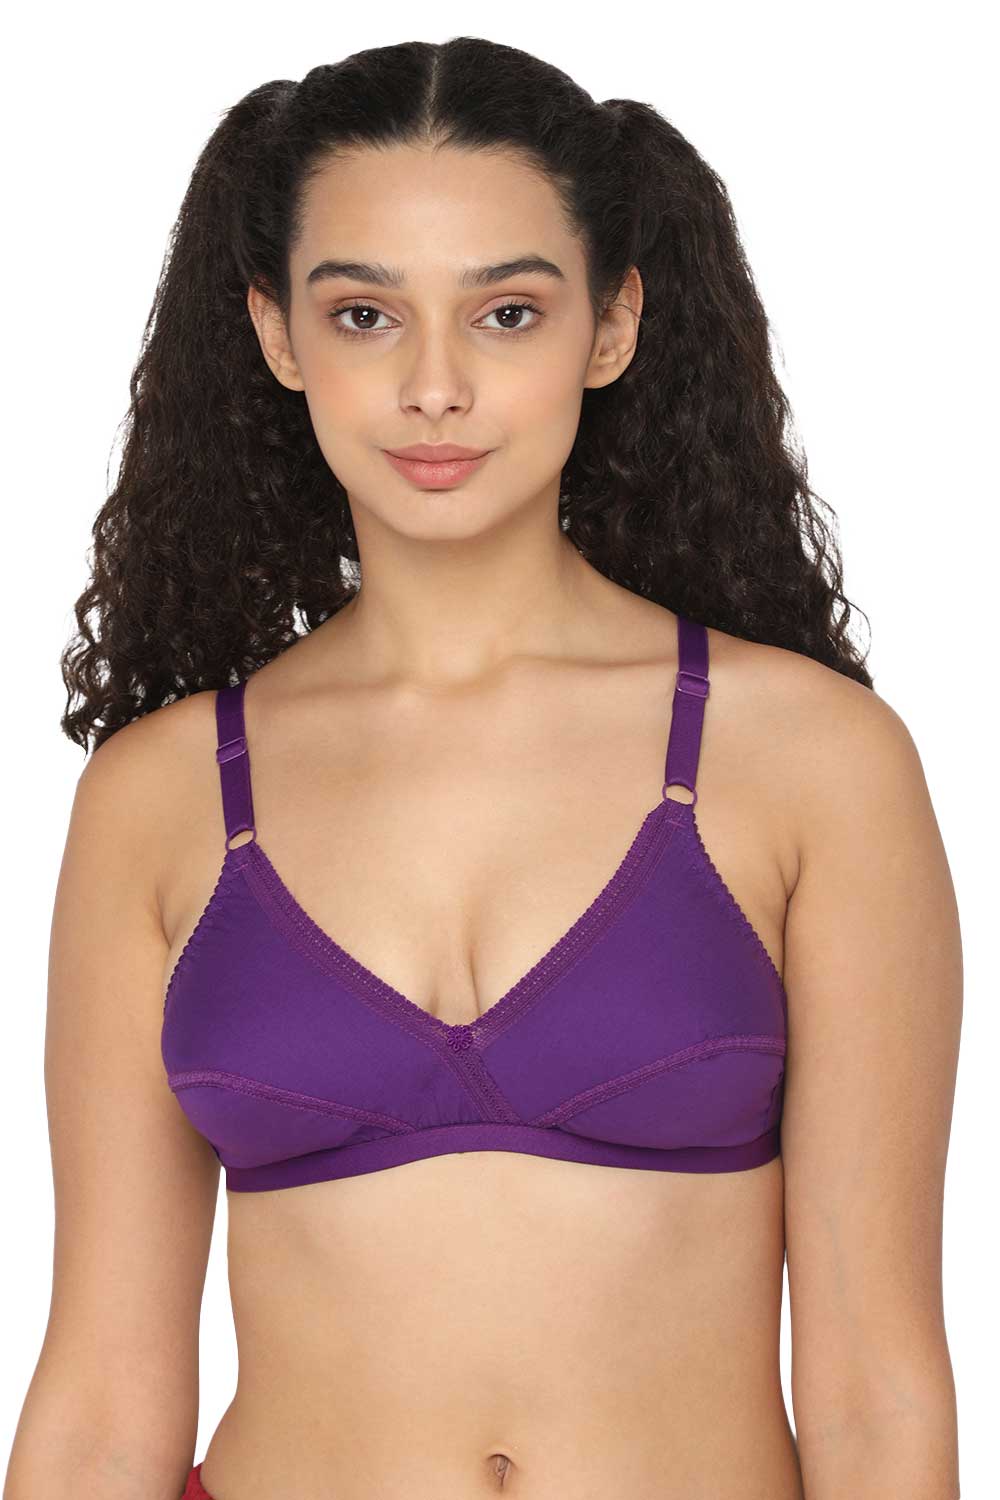 Naidu Hall Heritage-Bra Special Combo Pack - Lovable - C42